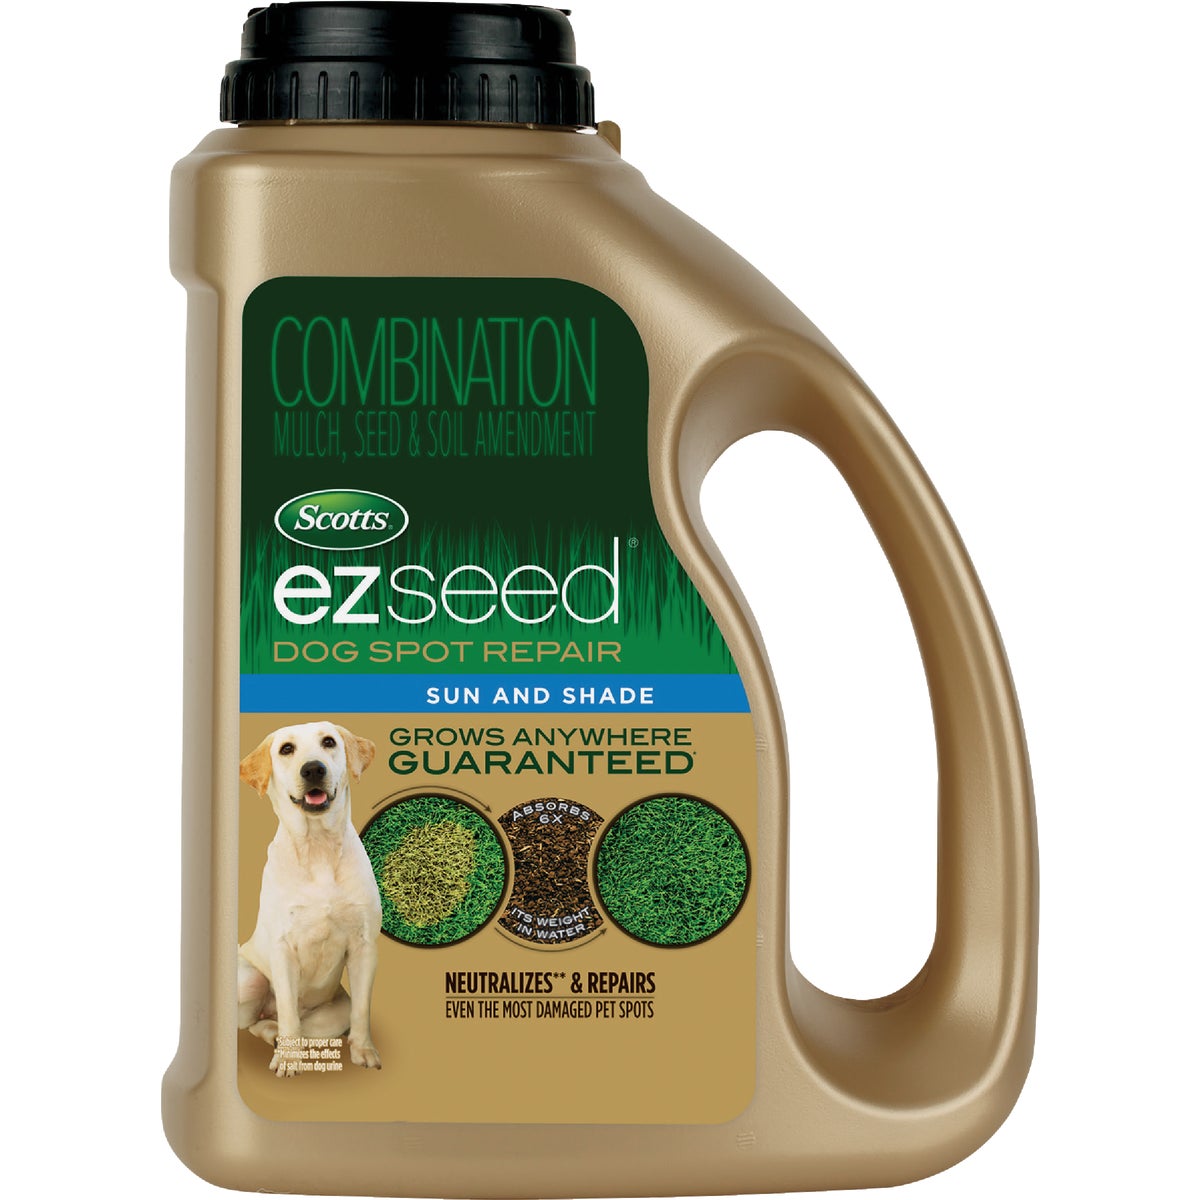 Scotts eZ Seed 2 Lb. Covers Up to 100 Dog Spots Sun & Shade Grass Patch & Repair